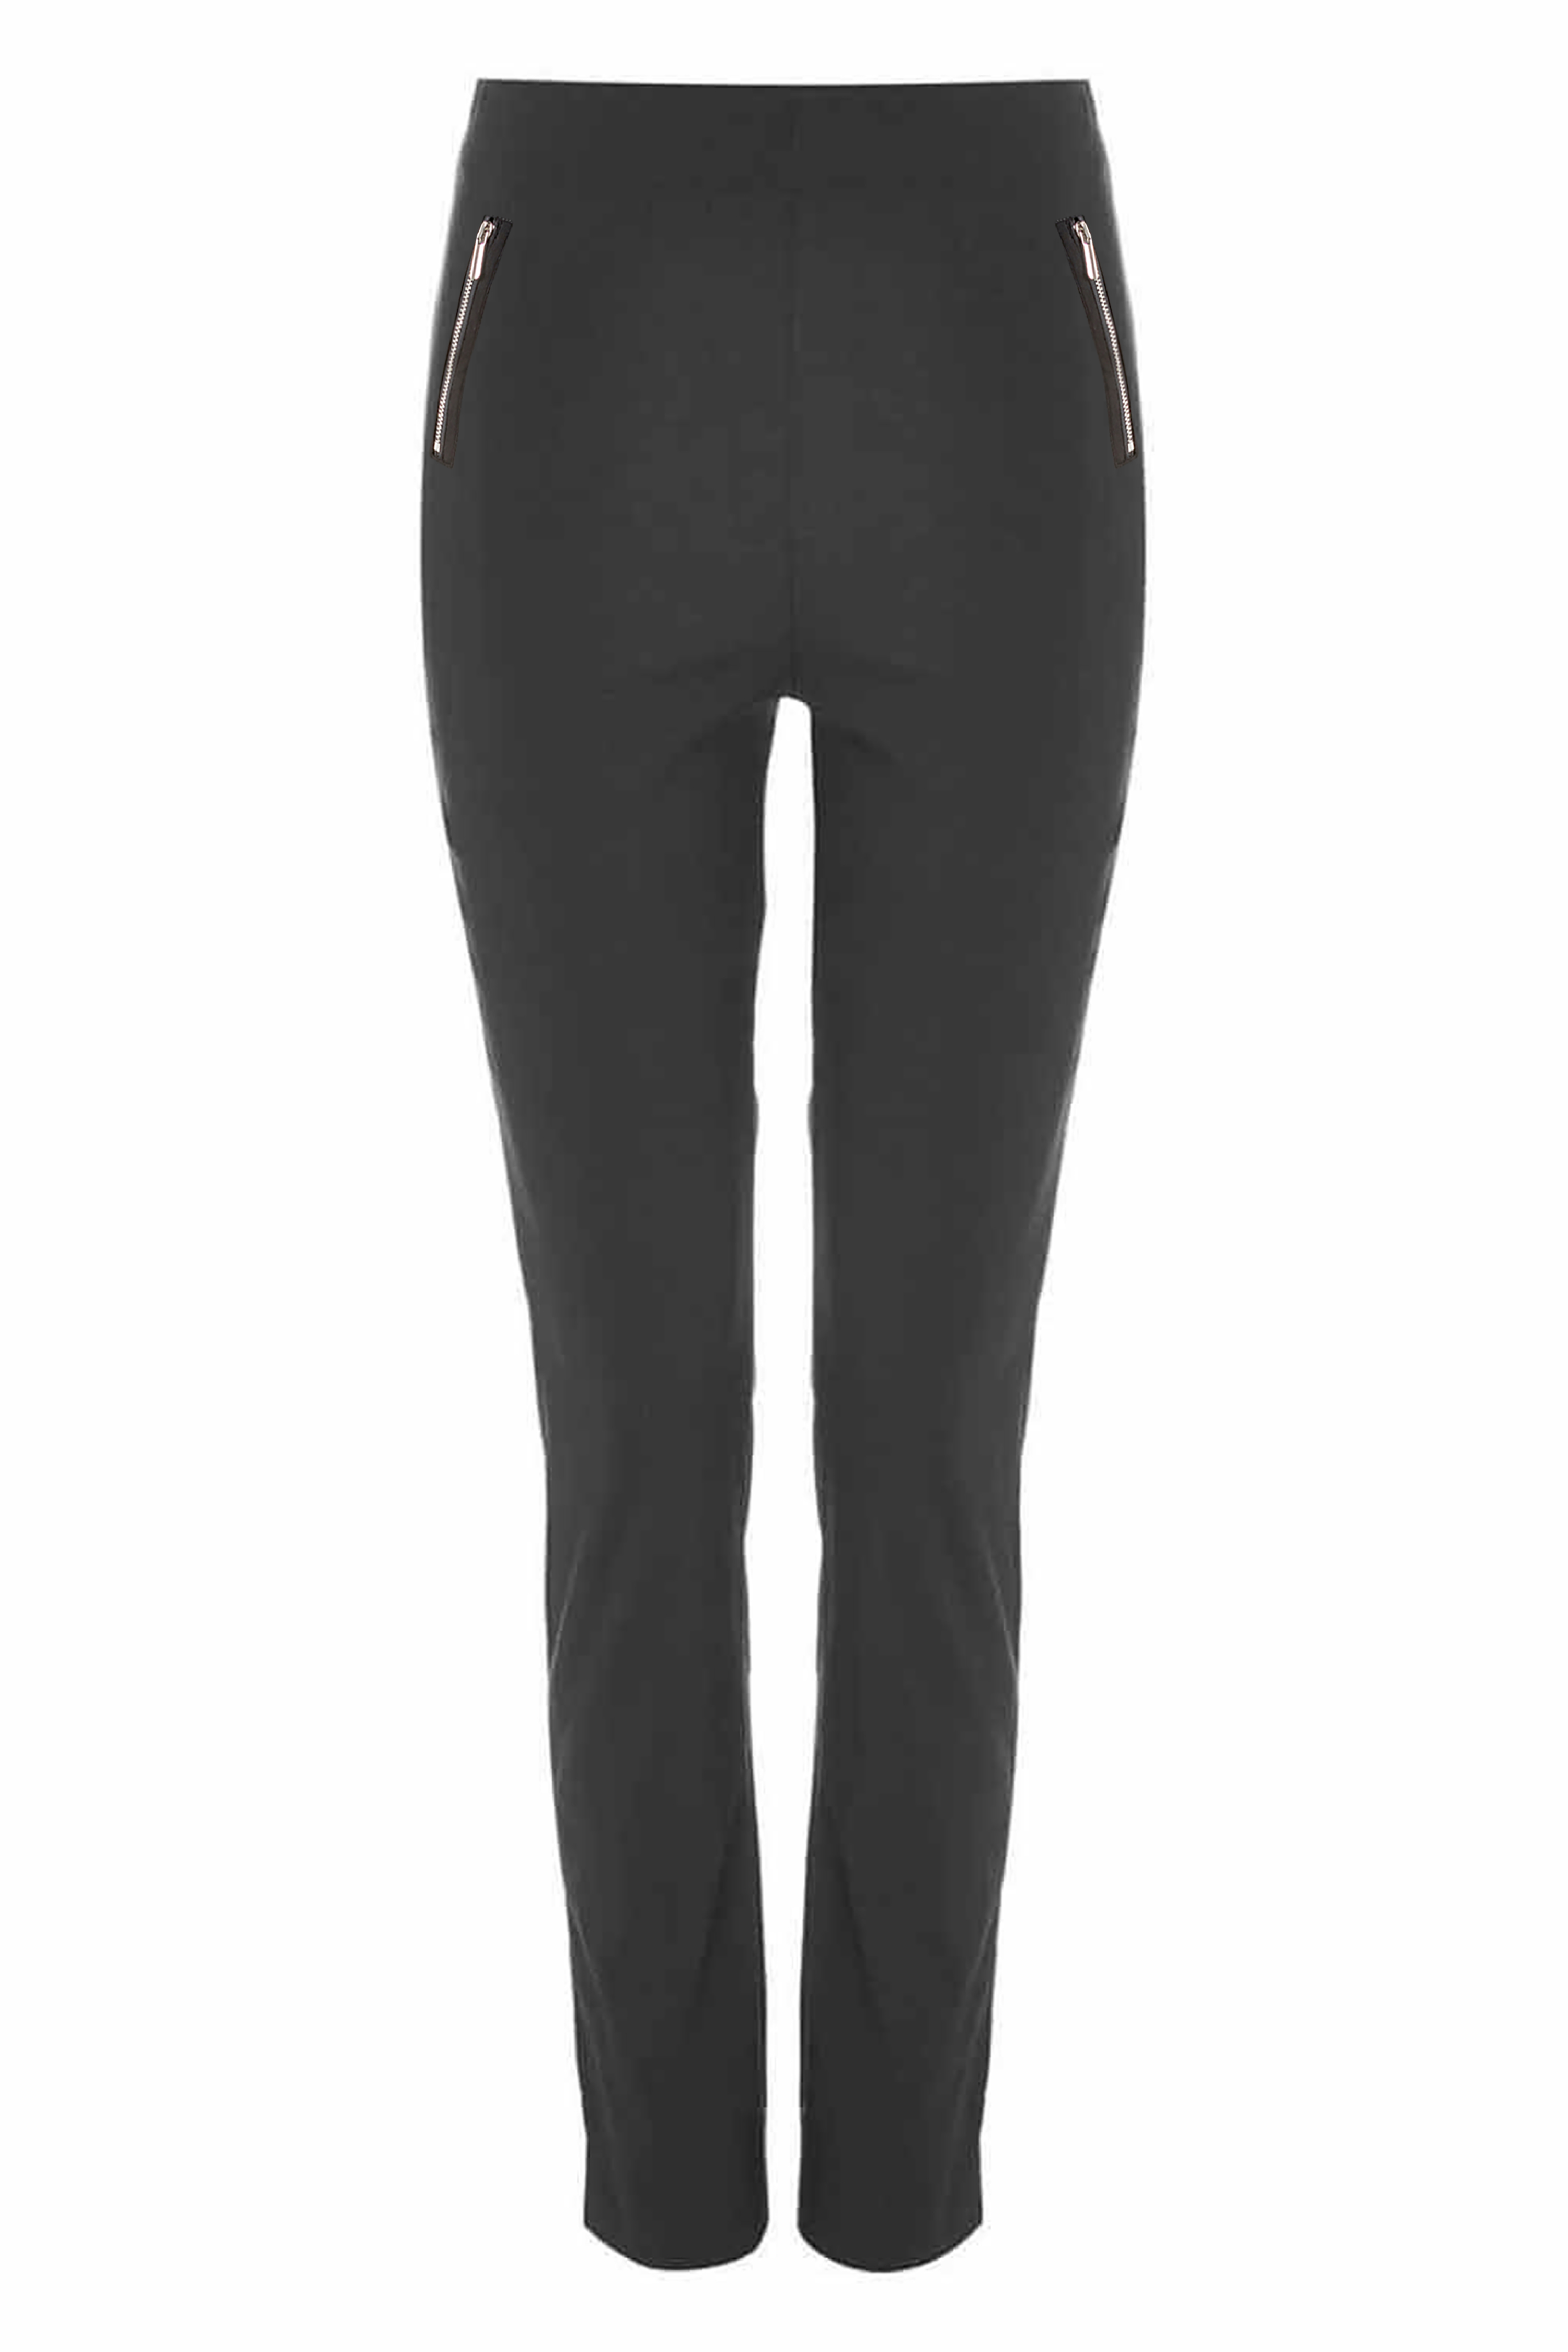 Black Zip Detail Stretch Trouser, Image 3 of 4